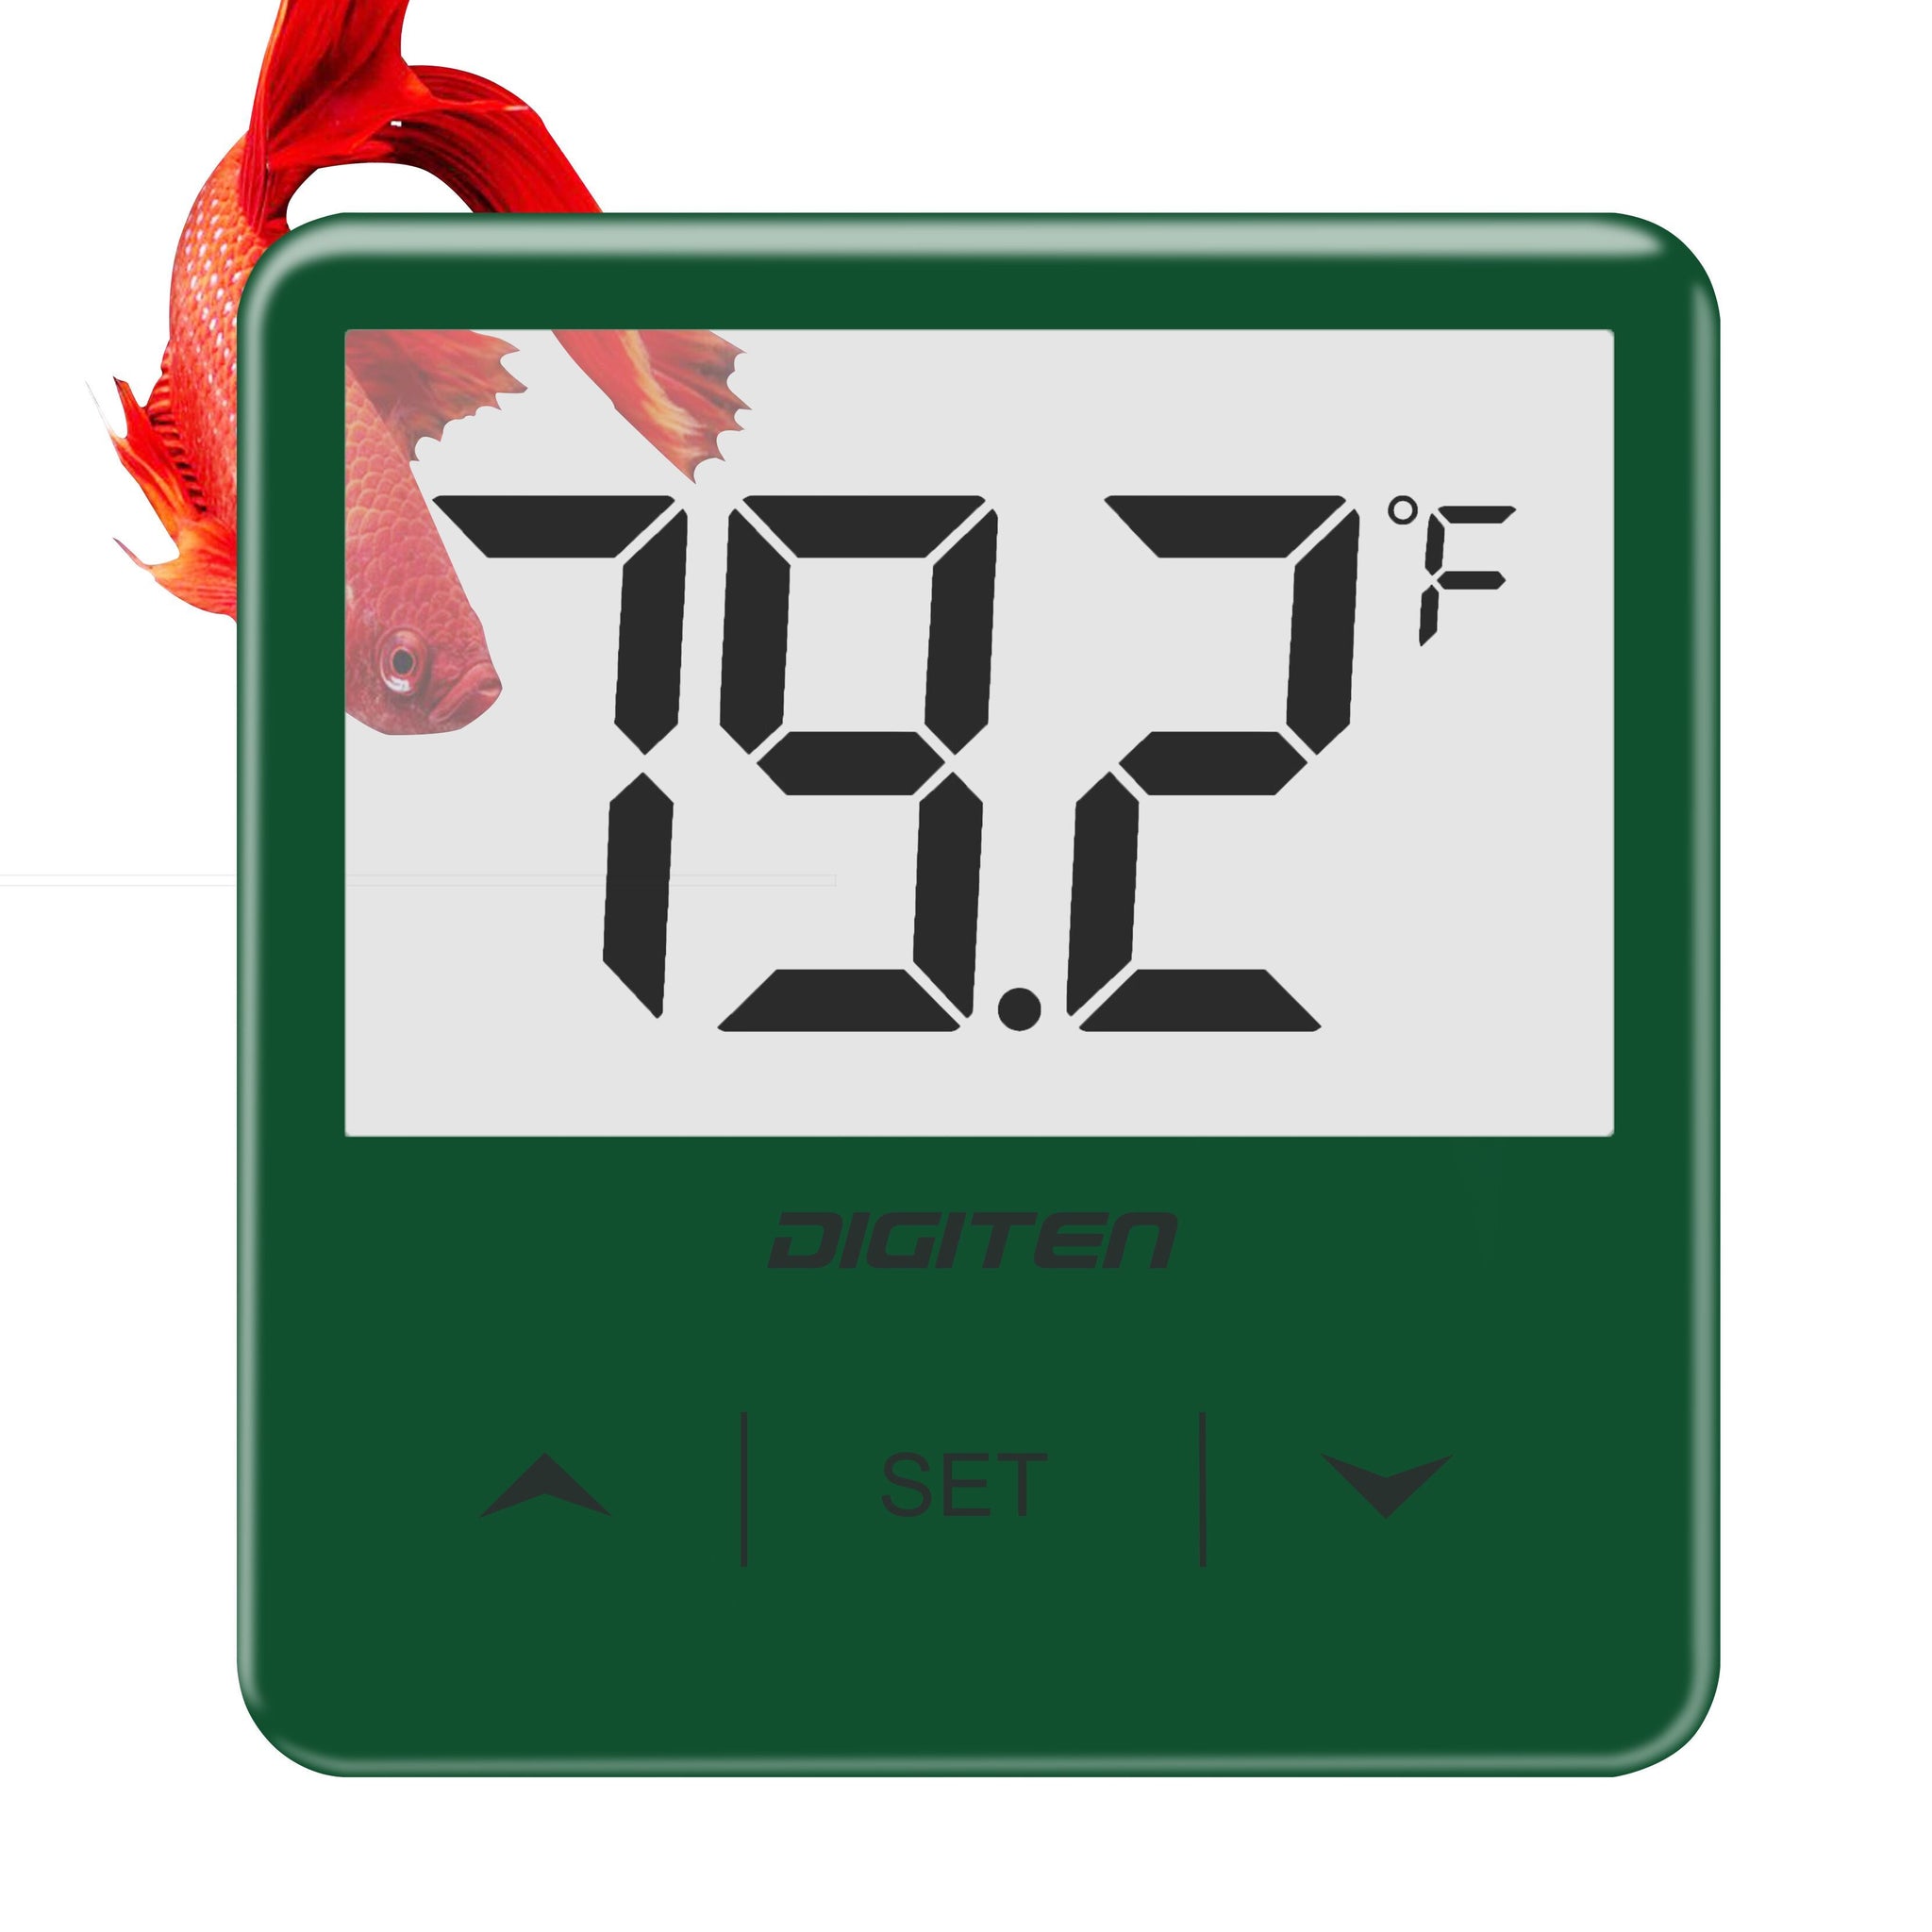 Hygro-Thermometers (Large Display)